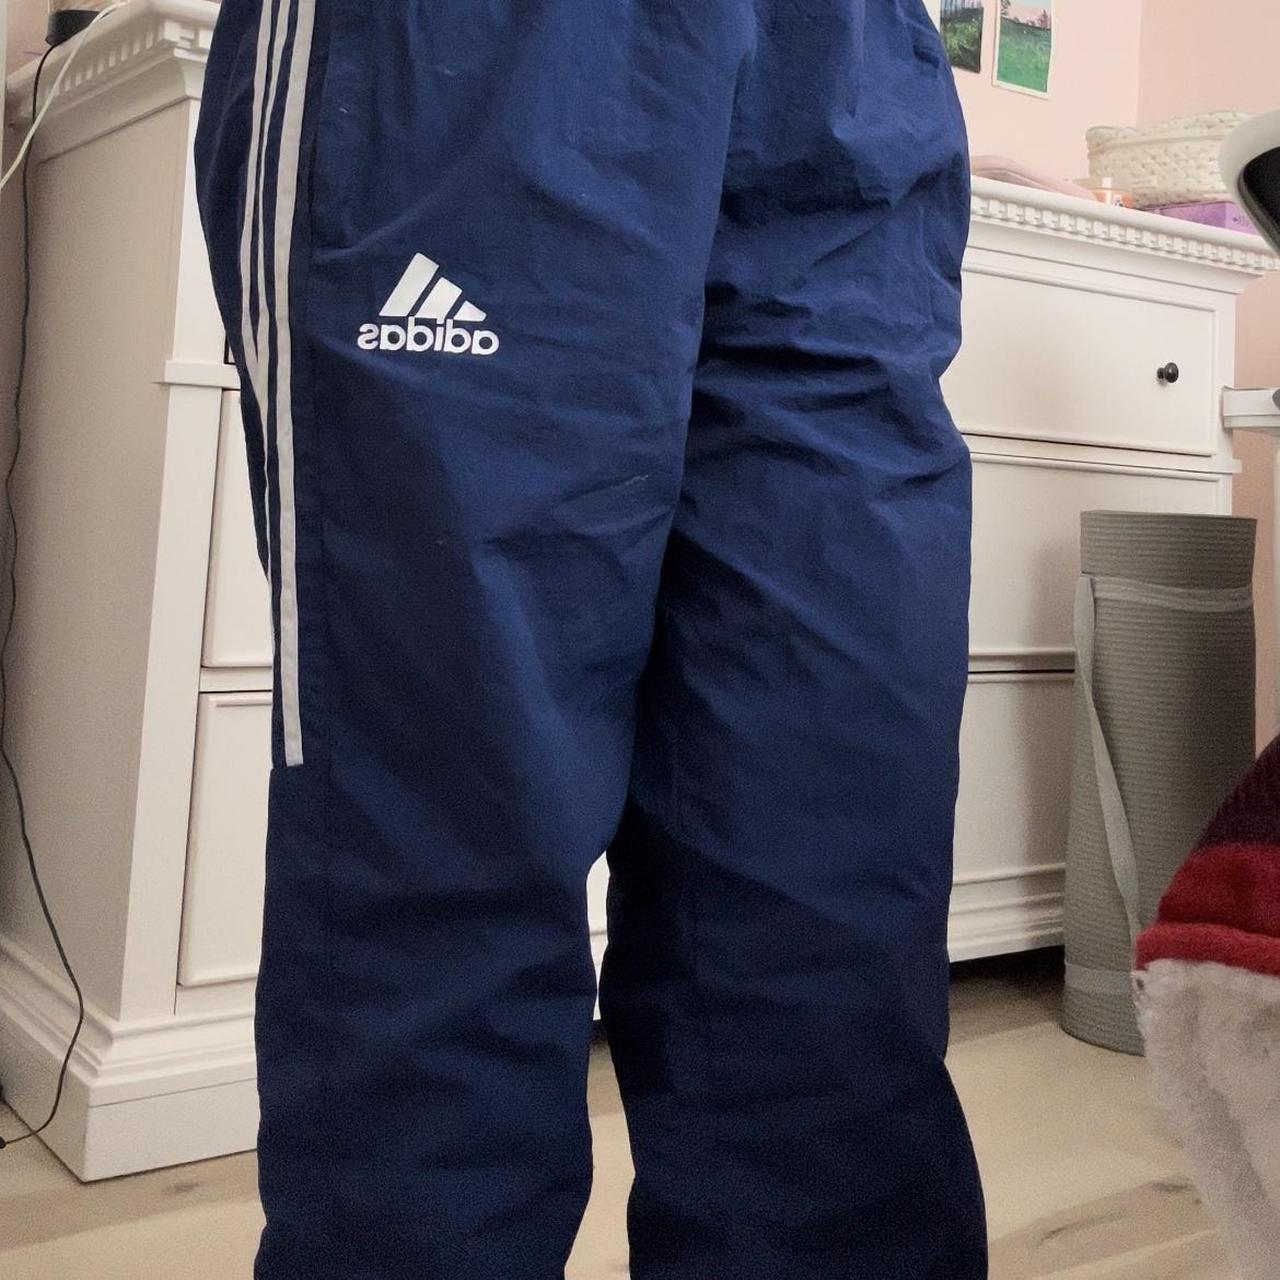 Adidas Women's Navy and Blue Joggers-tracksuits (3)